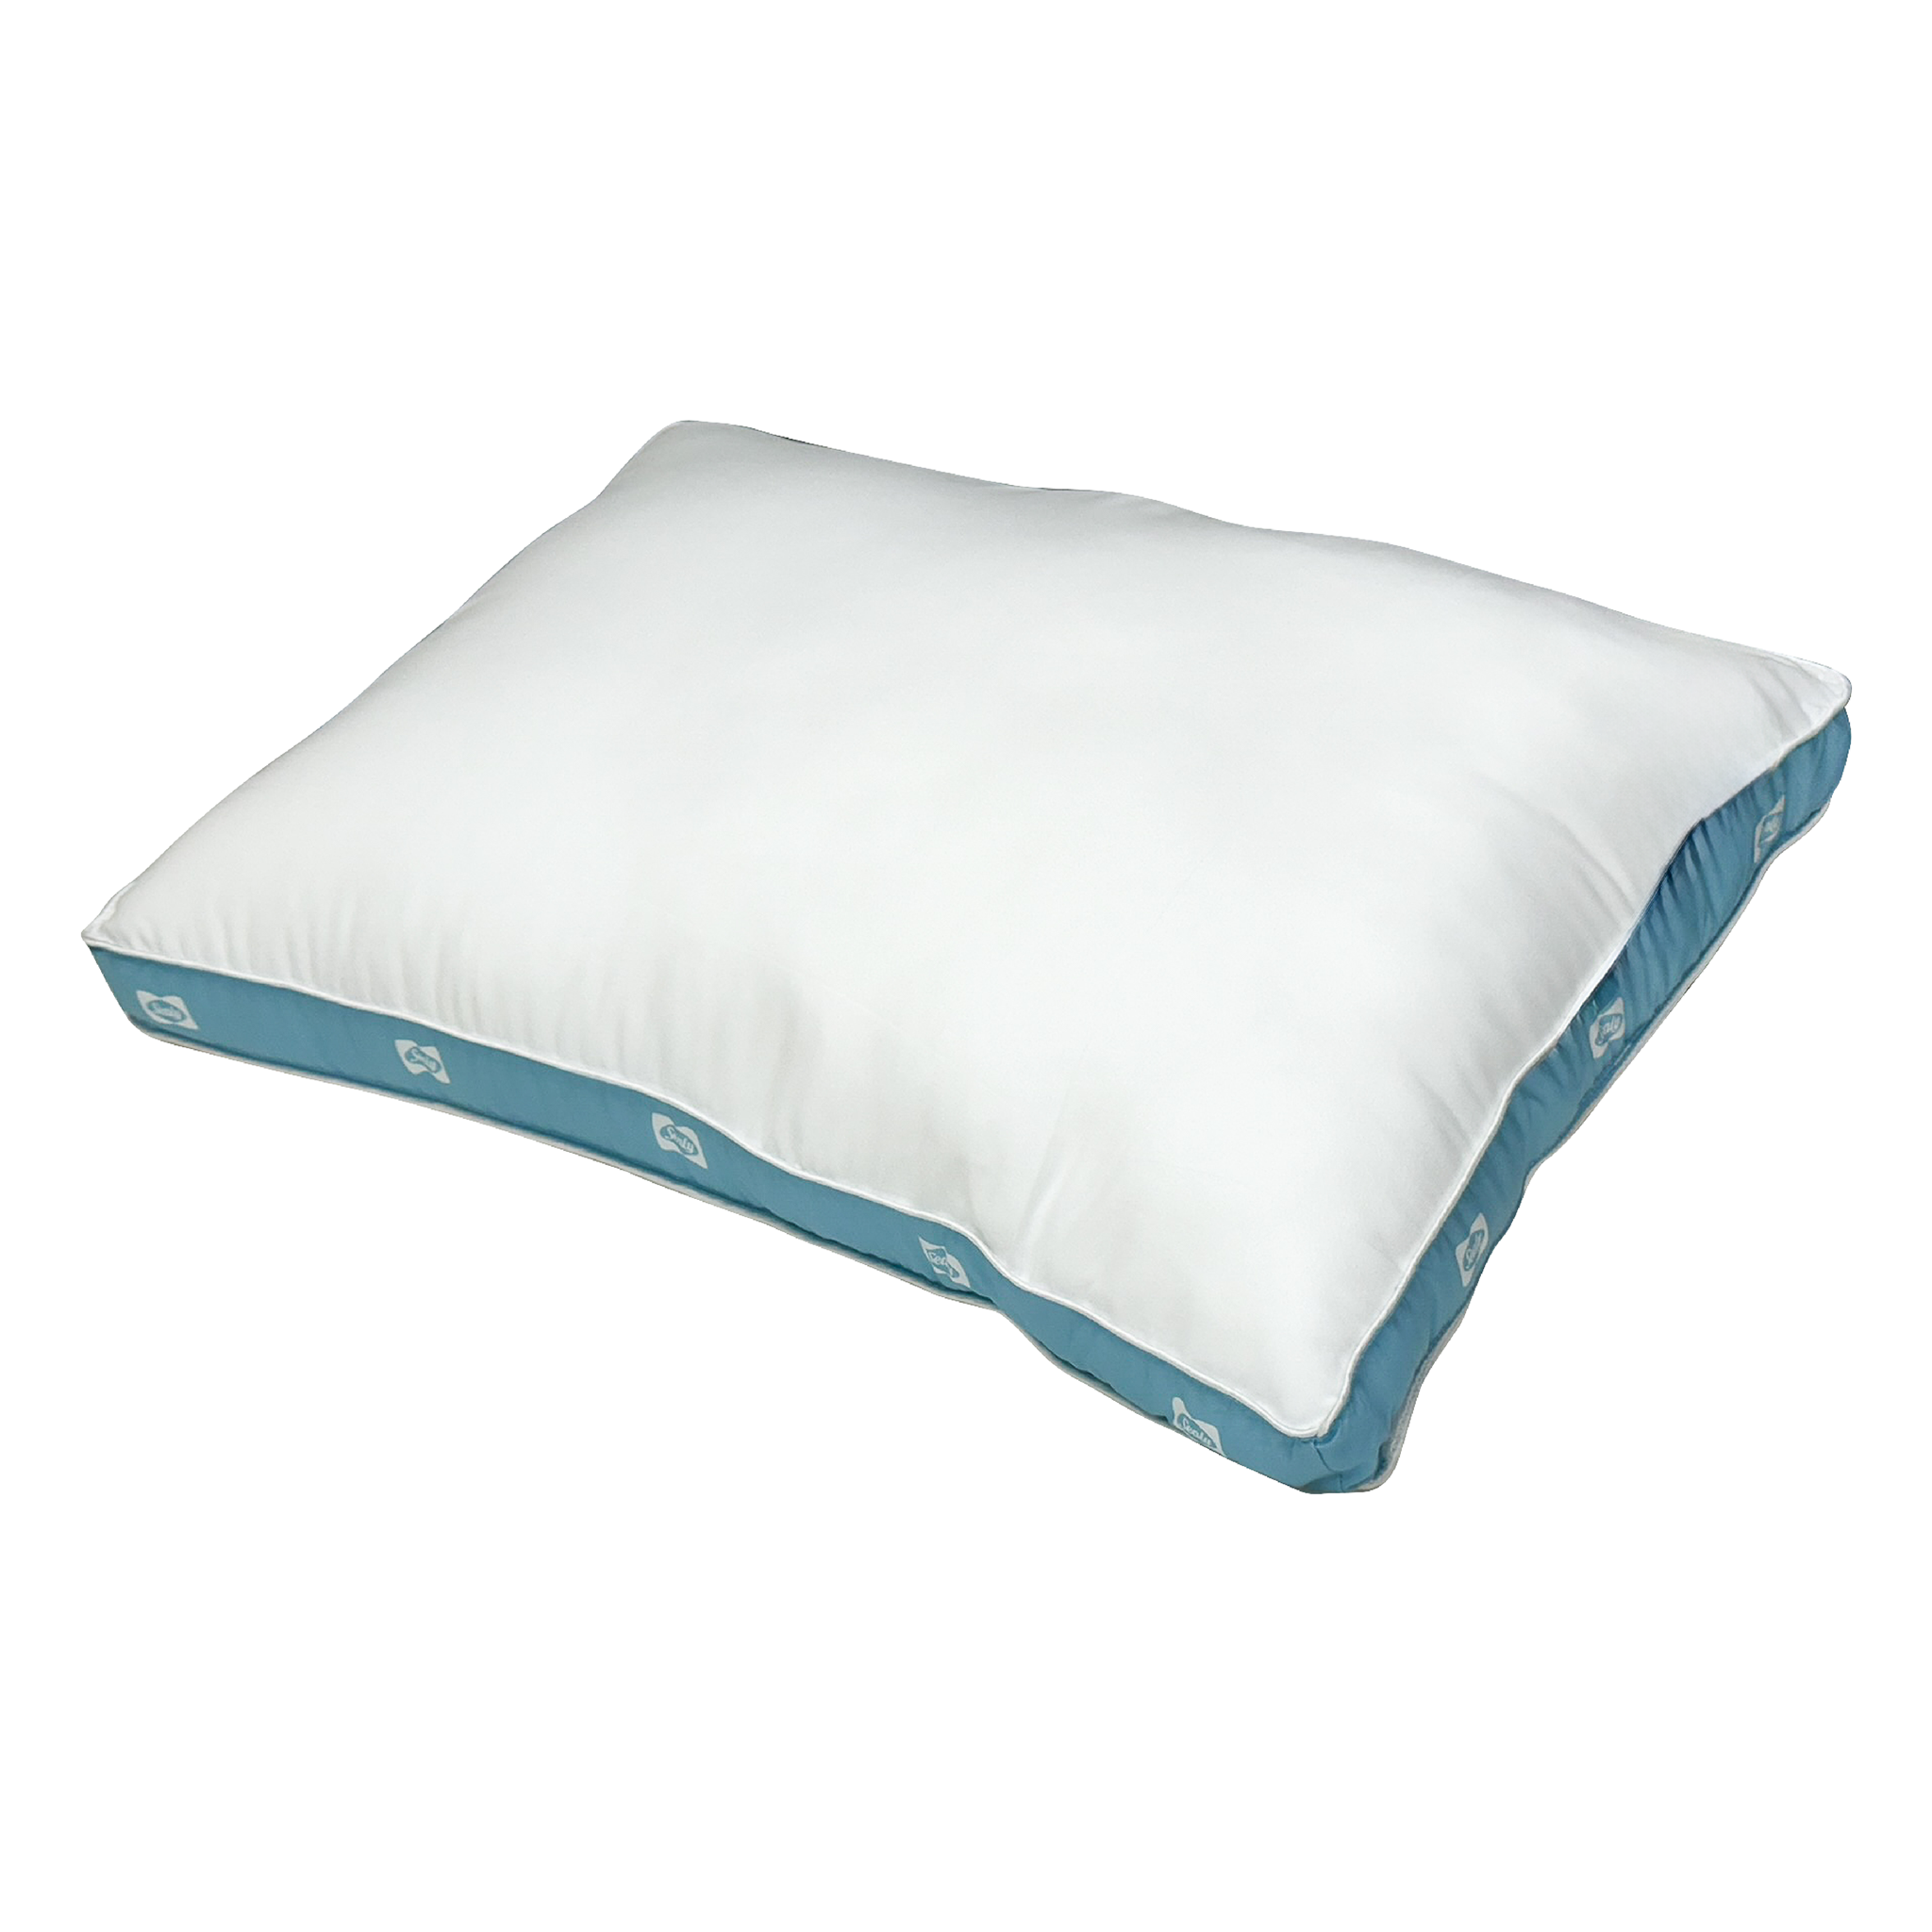 SEALY COMFORT PILLOW